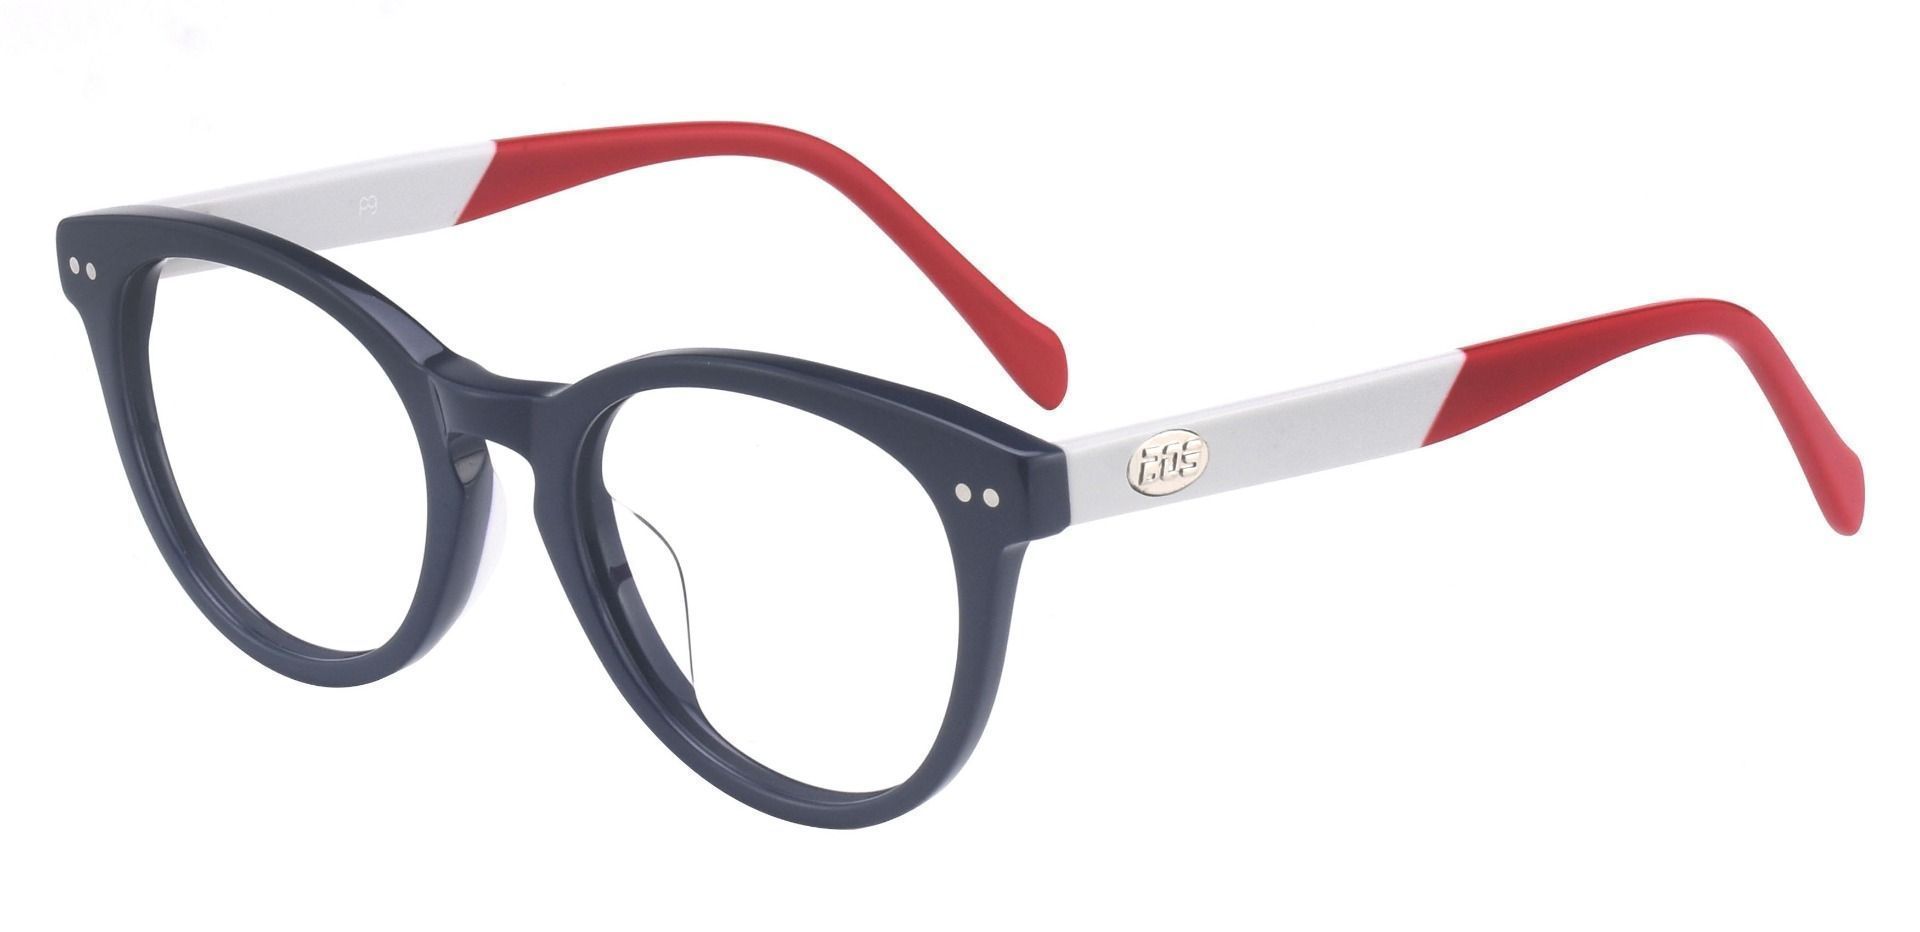 Revere Oval Progressive Glasses - The Frame Is Blue And Red